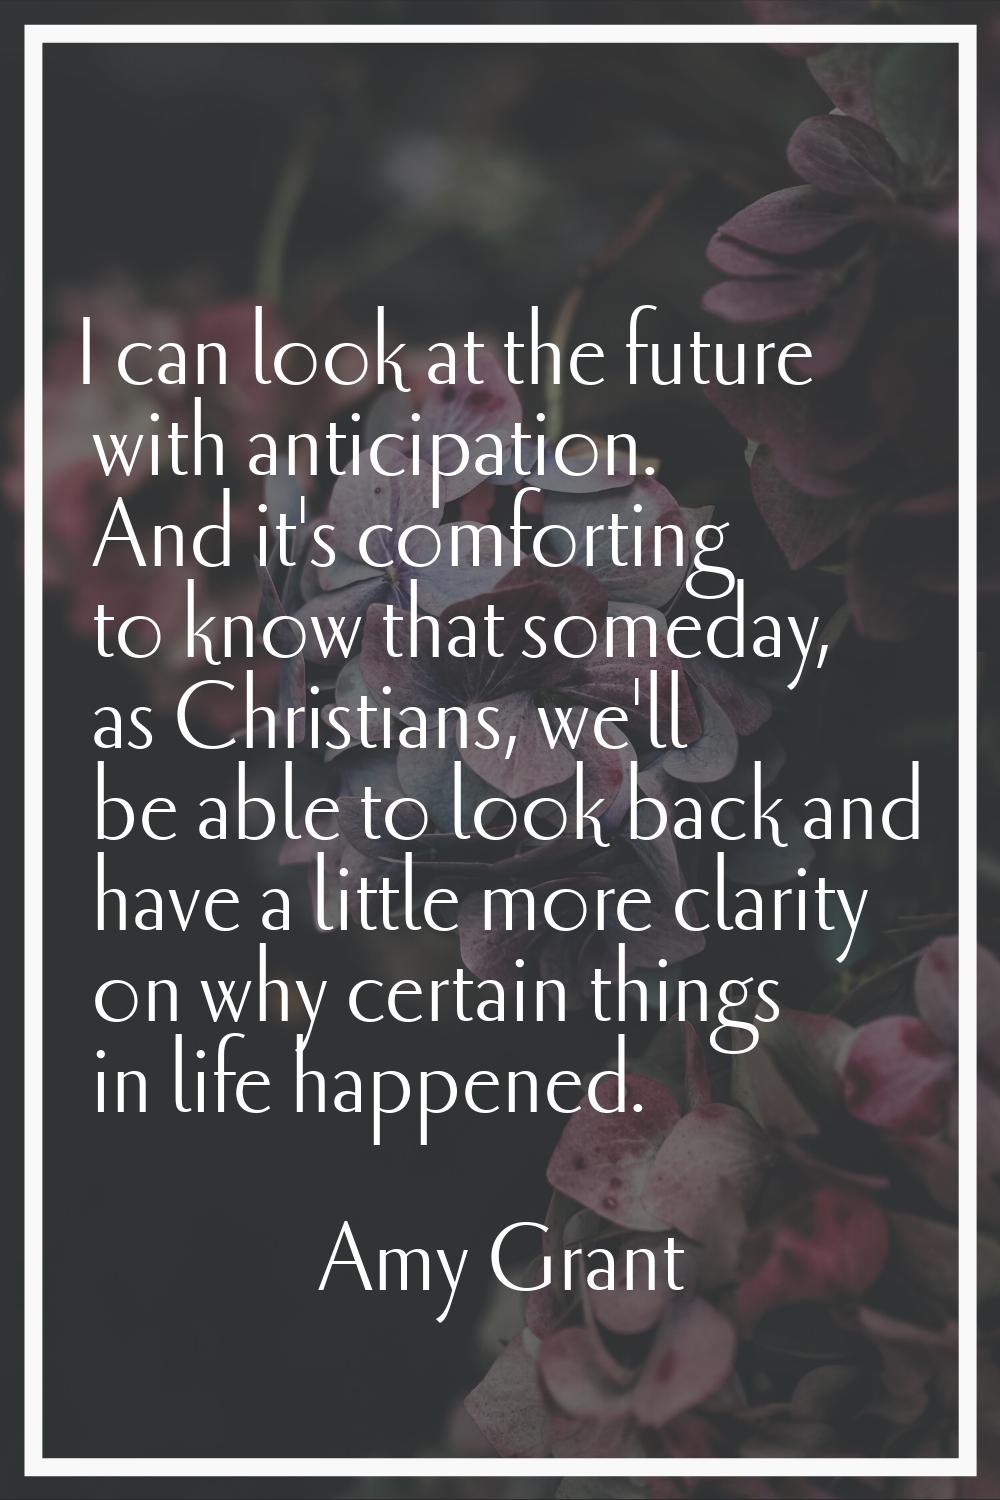 I can look at the future with anticipation. And it's comforting to know that someday, as Christians